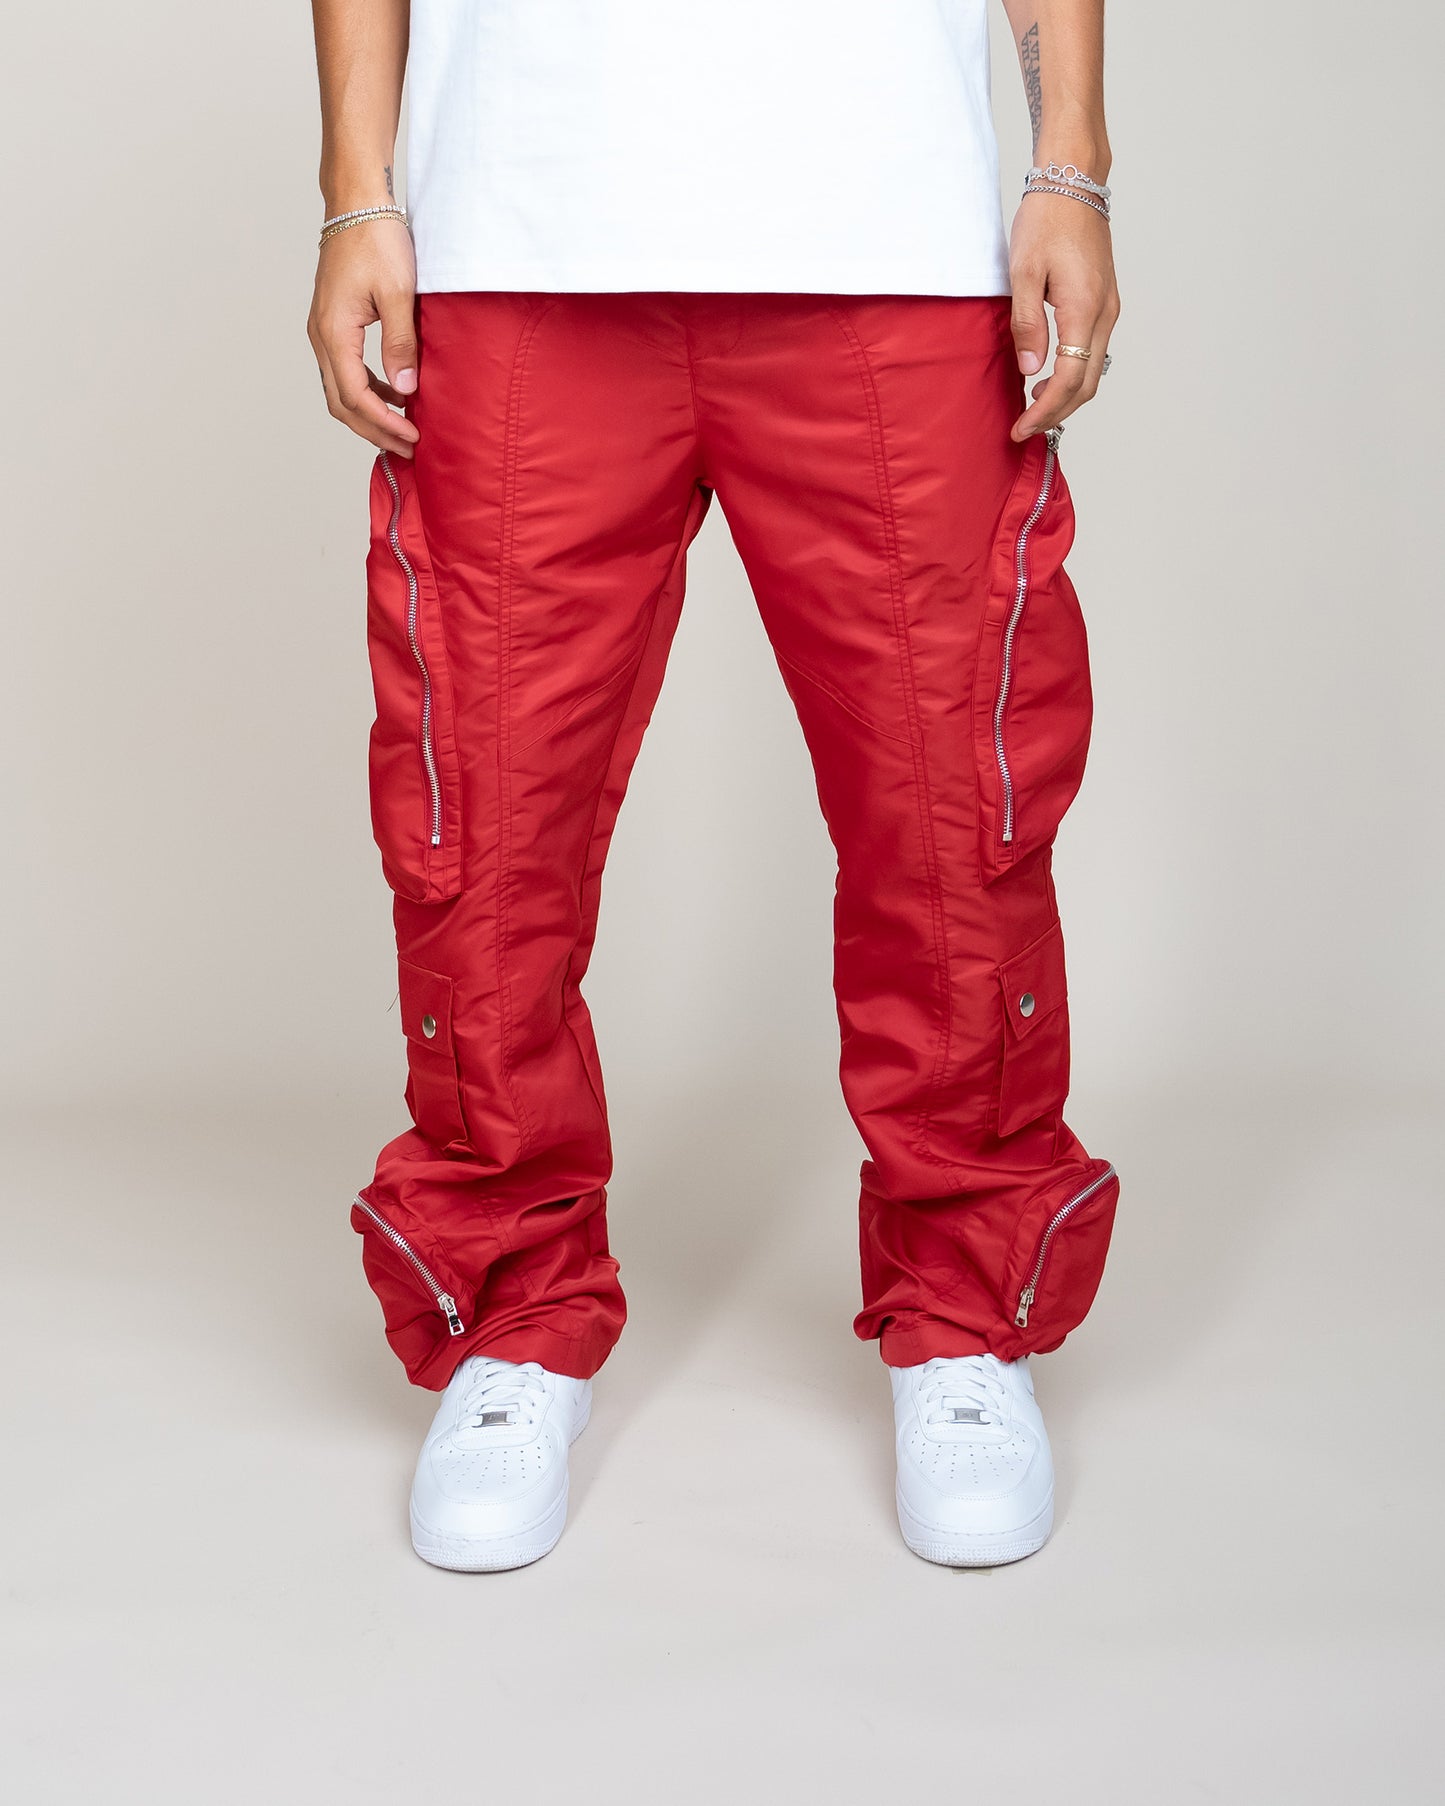 EPTM MOON CARGO-RED